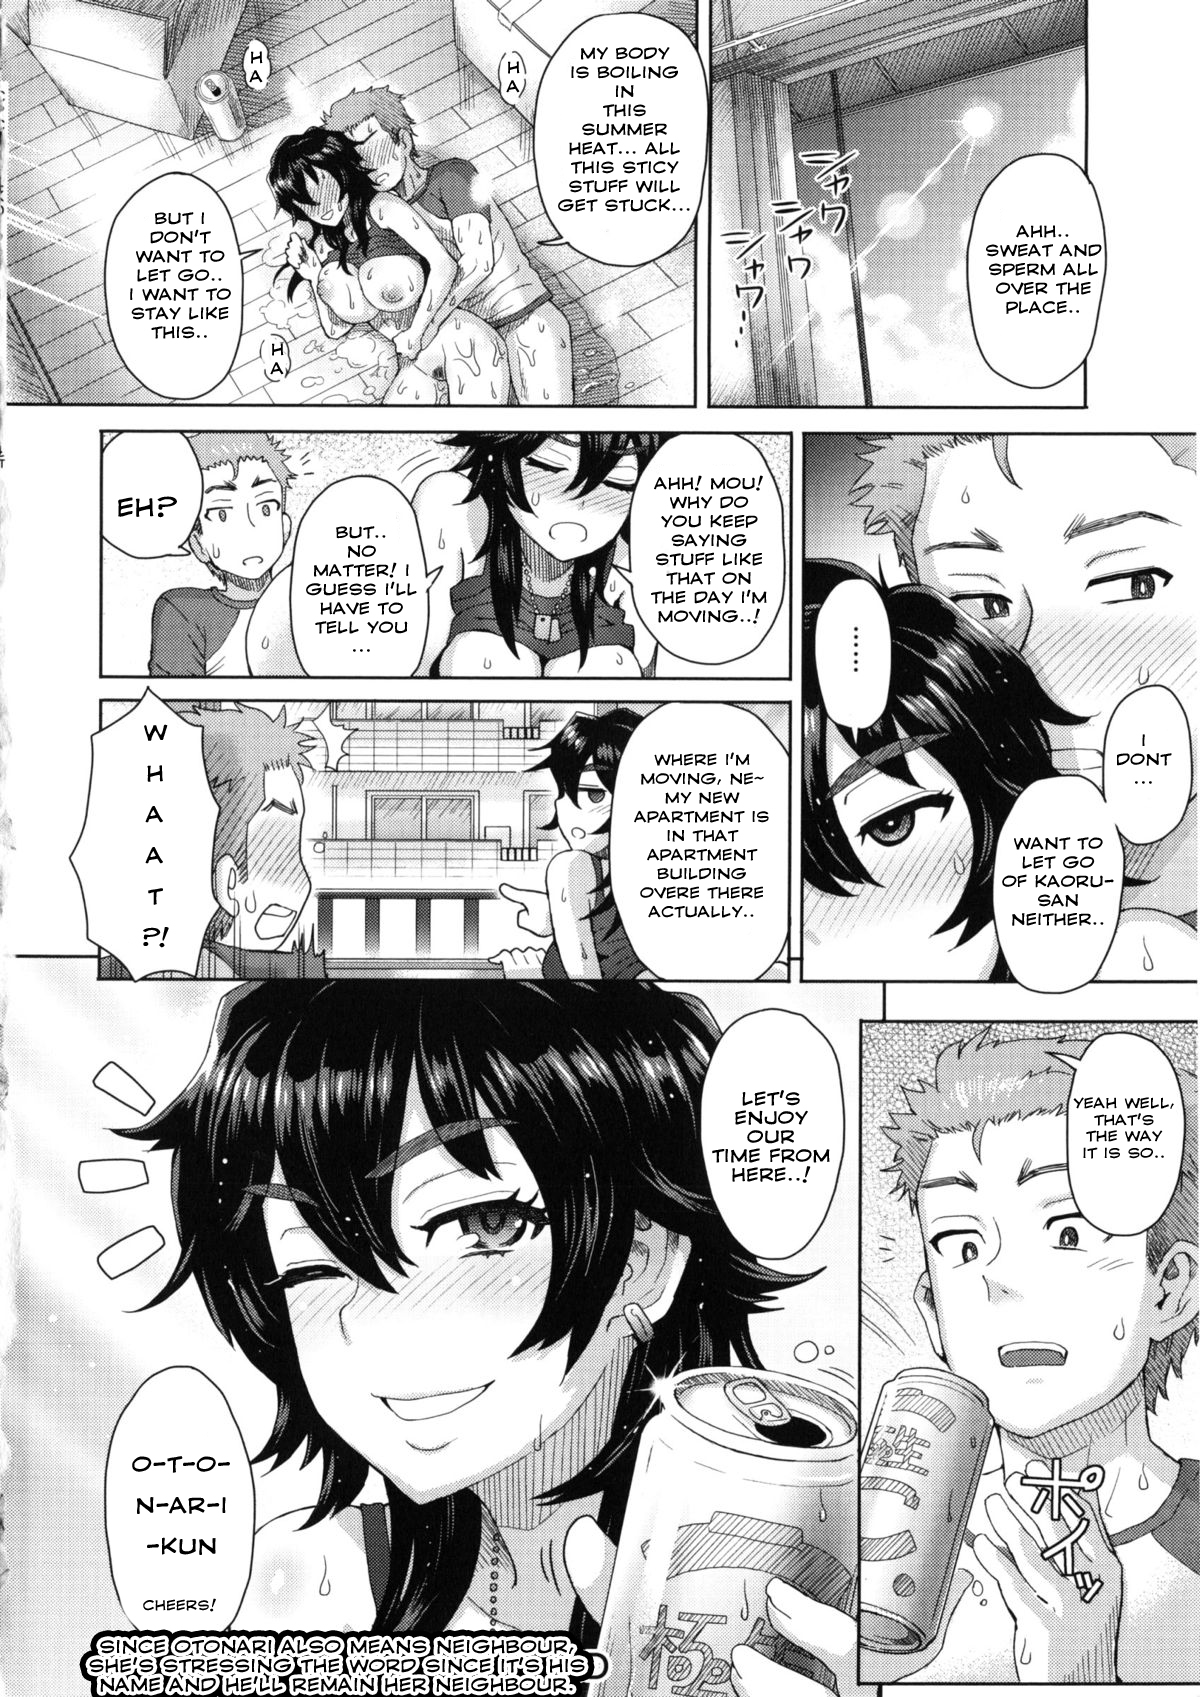 [Itou Eight] The Situation with the Young Girl Next Door Moving in [English] page 16 full